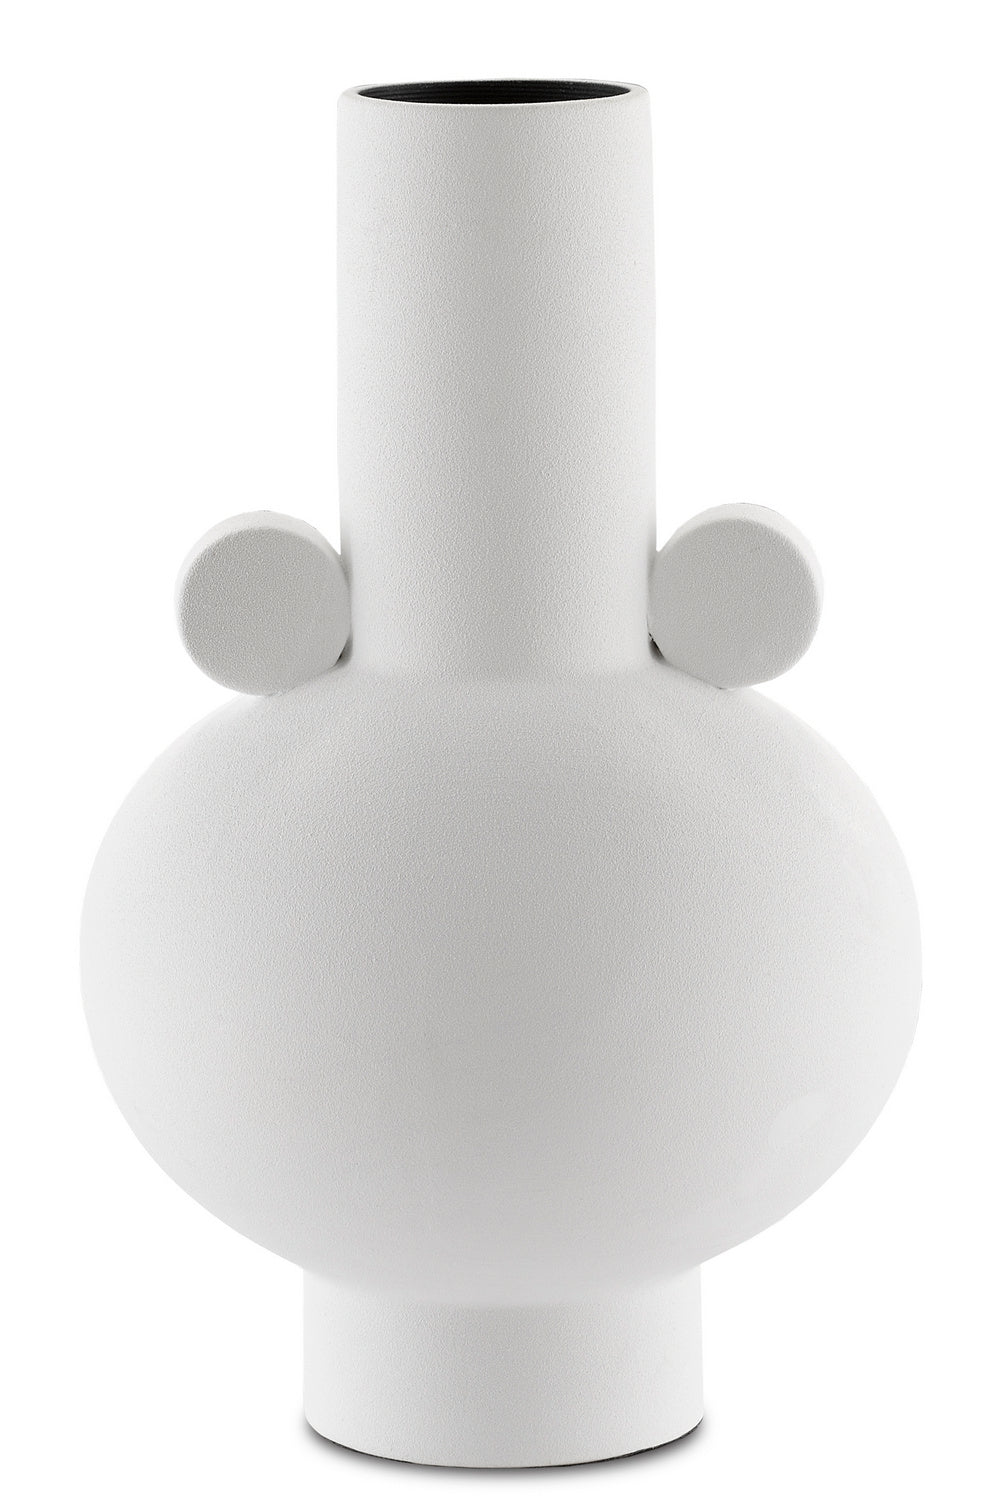 Vase from the Happy collection in Textured White finish